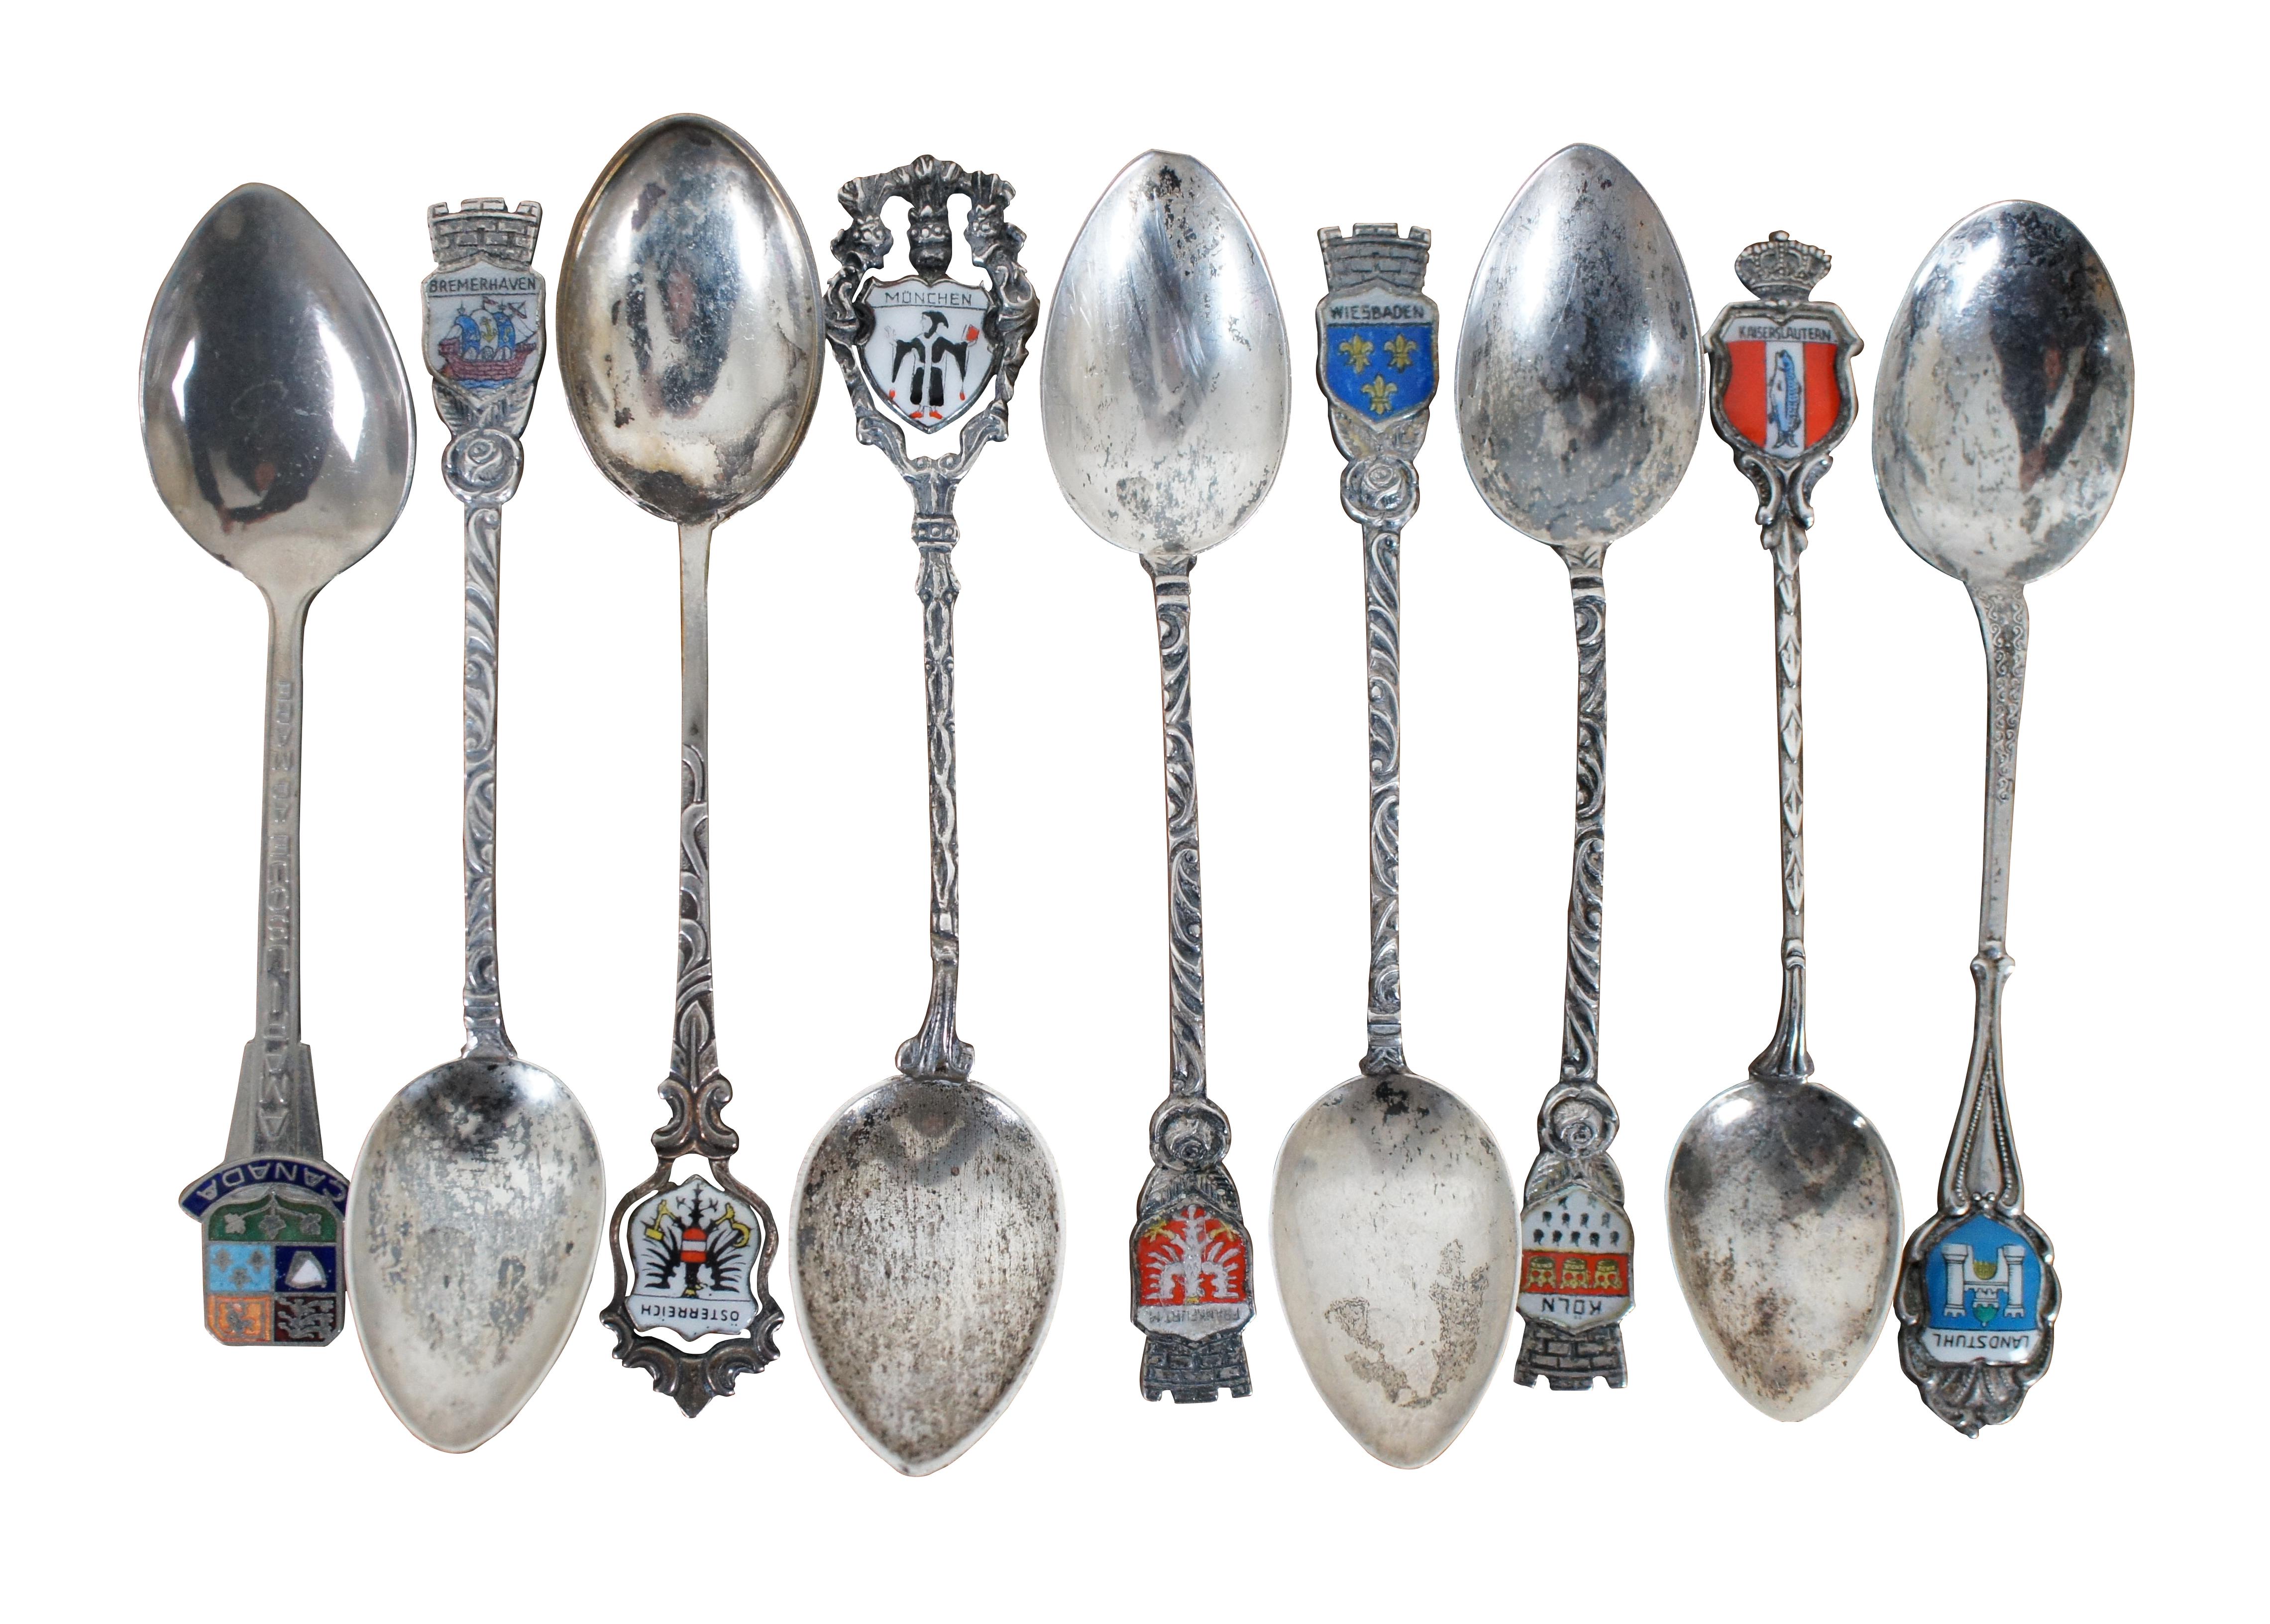 Lot of 9 German (and one Canadian) assorted sterling, 800 silver, and silver plate souvenir spoons with enameled tops.

Approx - 4” x 0.75” (Length x Width) / Sterling/800 Combined Weight - 37.6 g.